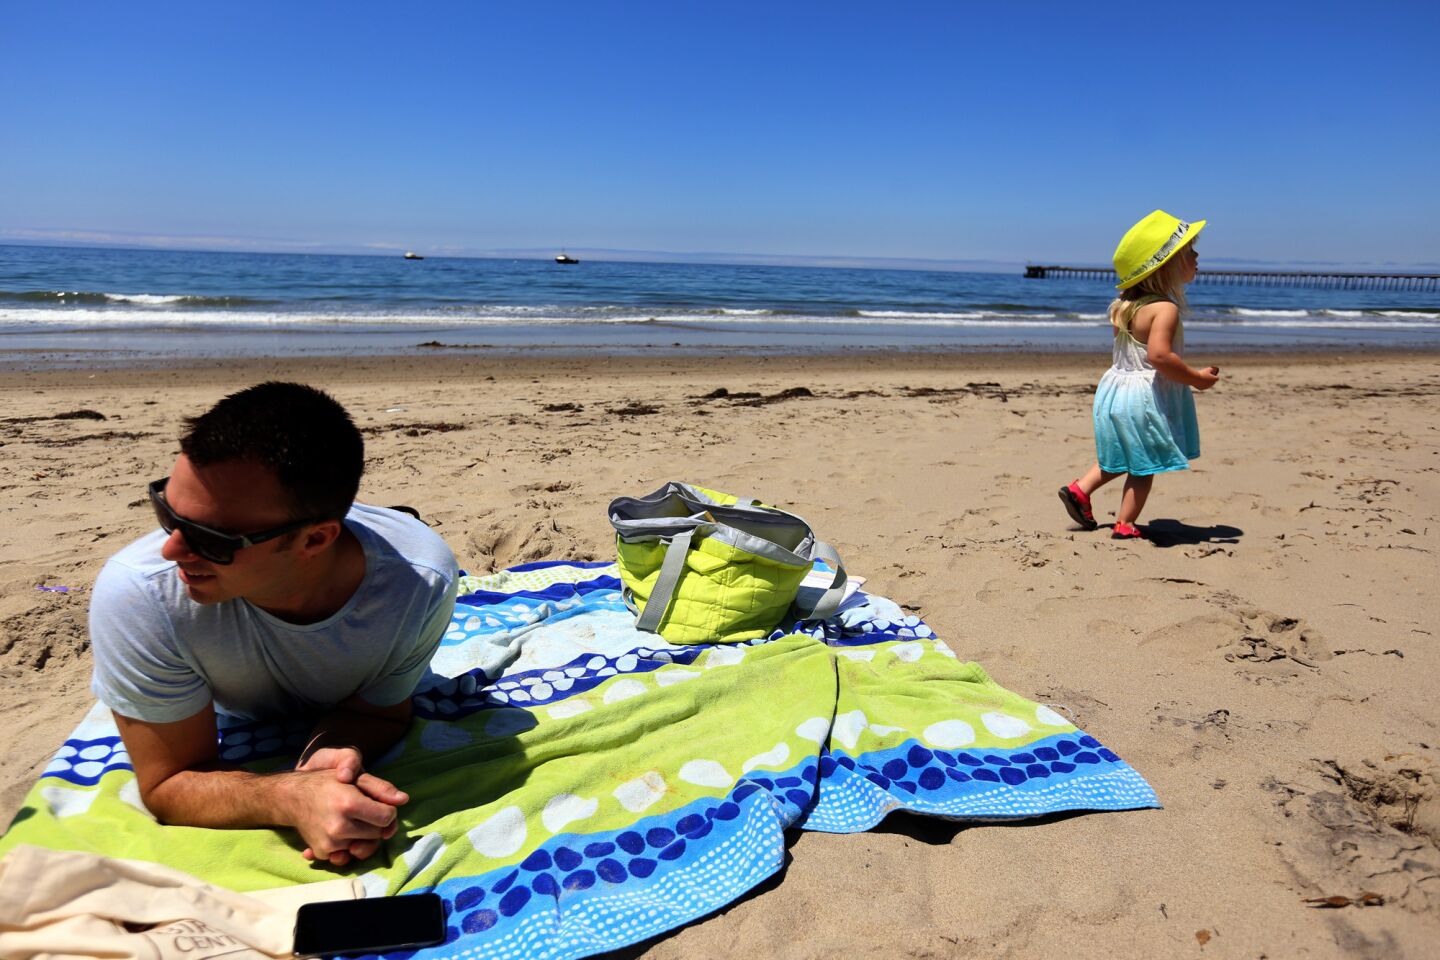 James Daly spends time with his daughter Camryn, 2, at Haskell Beach just south of the area of the oil spill. He noted that there's usually more people on the beach for Memorial Day weekend.